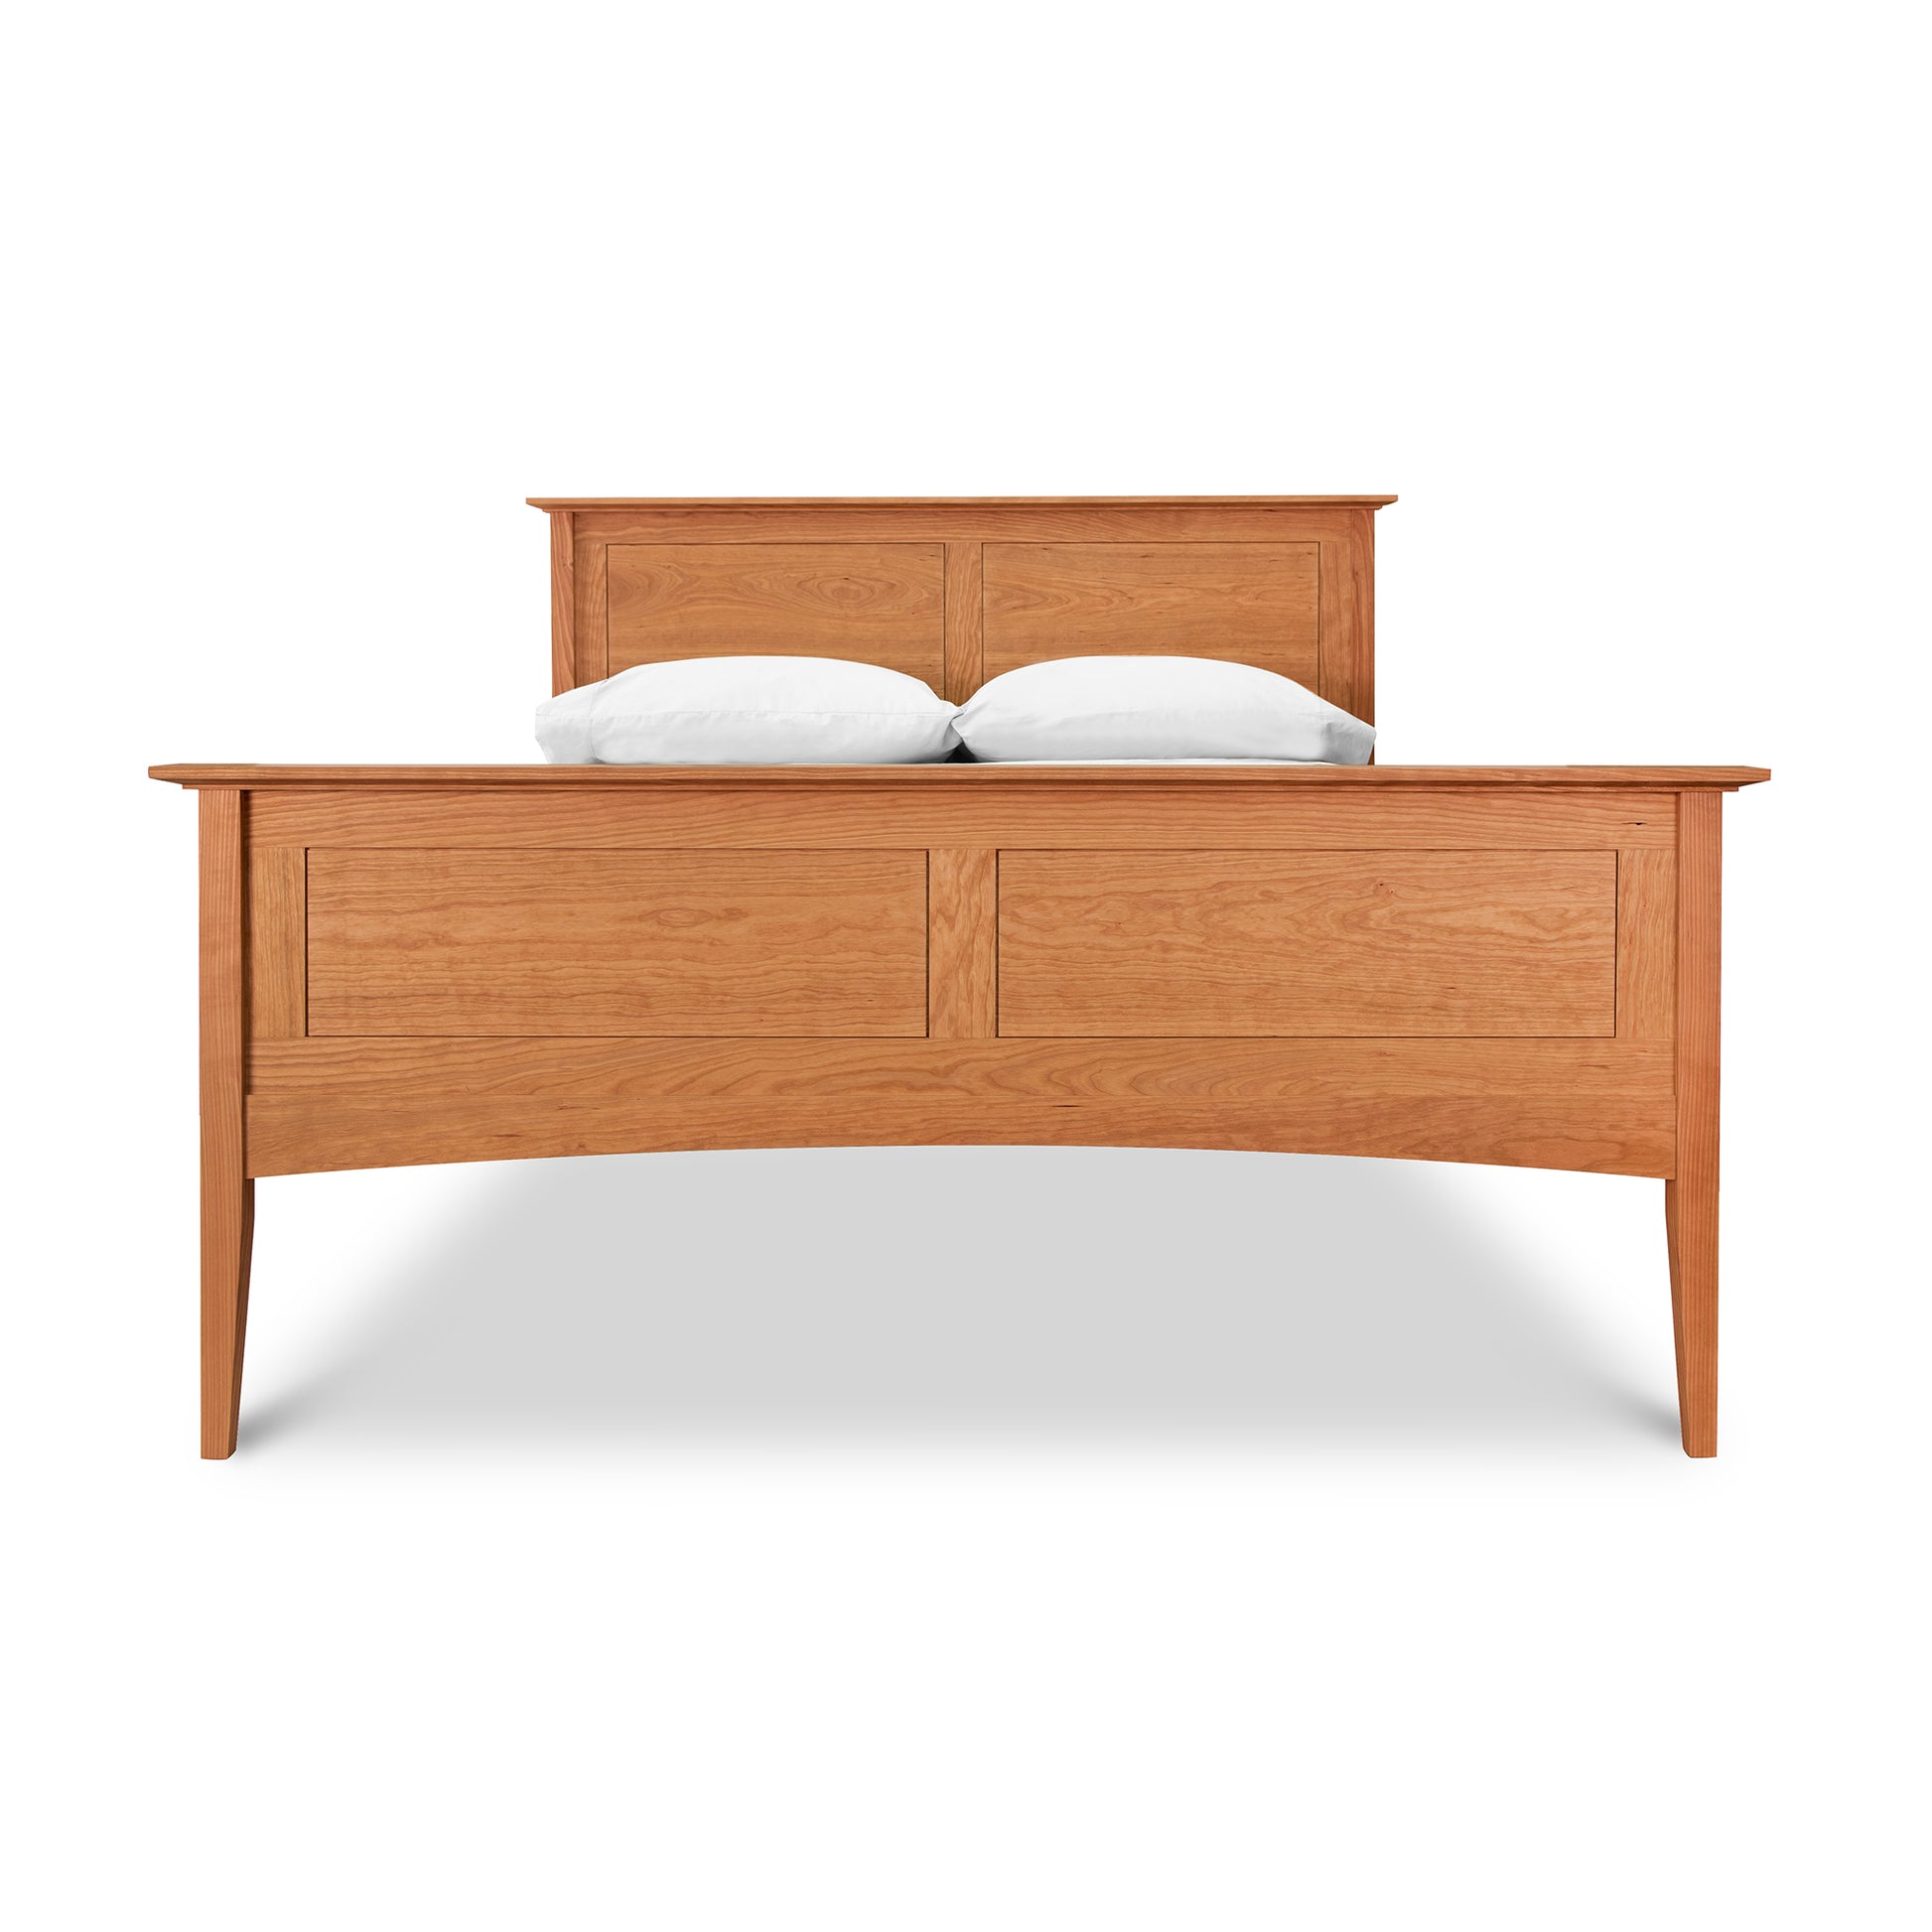 A Maple Corner Woodworks American Shaker Panel Bed with a high headboard featuring two Shaker panel designs, finished in a light oak color. The bed is made up with white pillows.